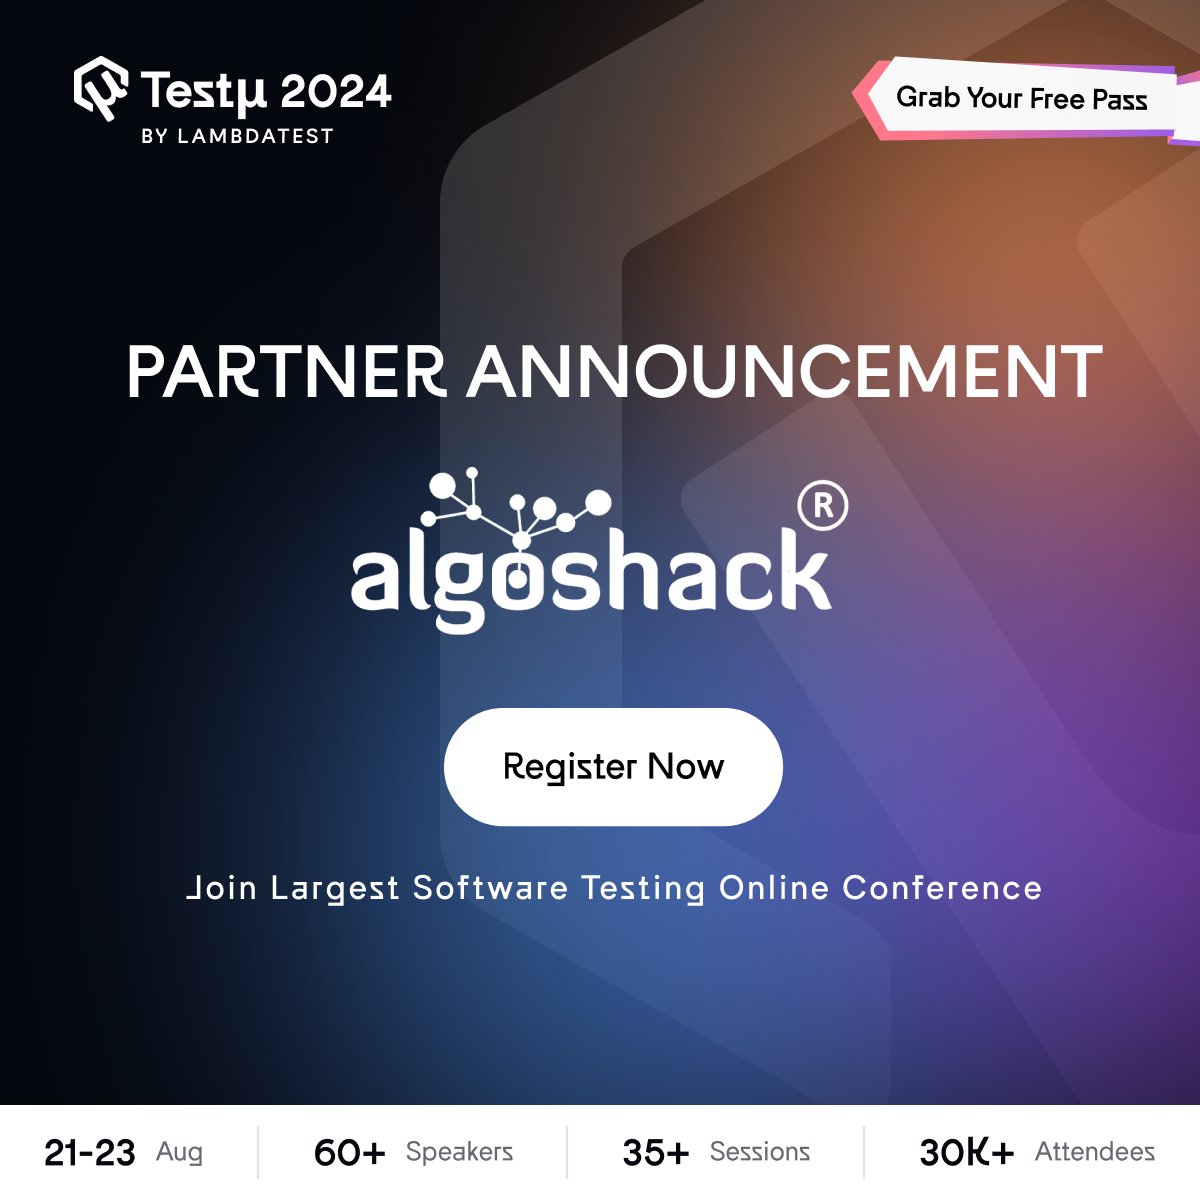 Excited to introduce @AlgoshackT as our partner for #TestMuConf 2024 🔗 bit.ly/testmuconf_2024

Drop by AlgoShack's booth to learn about transforming software quality with low code / no code. Also, get your hands on some intriguing freebies.🎁🎁

#Conference #SoftwareTesting